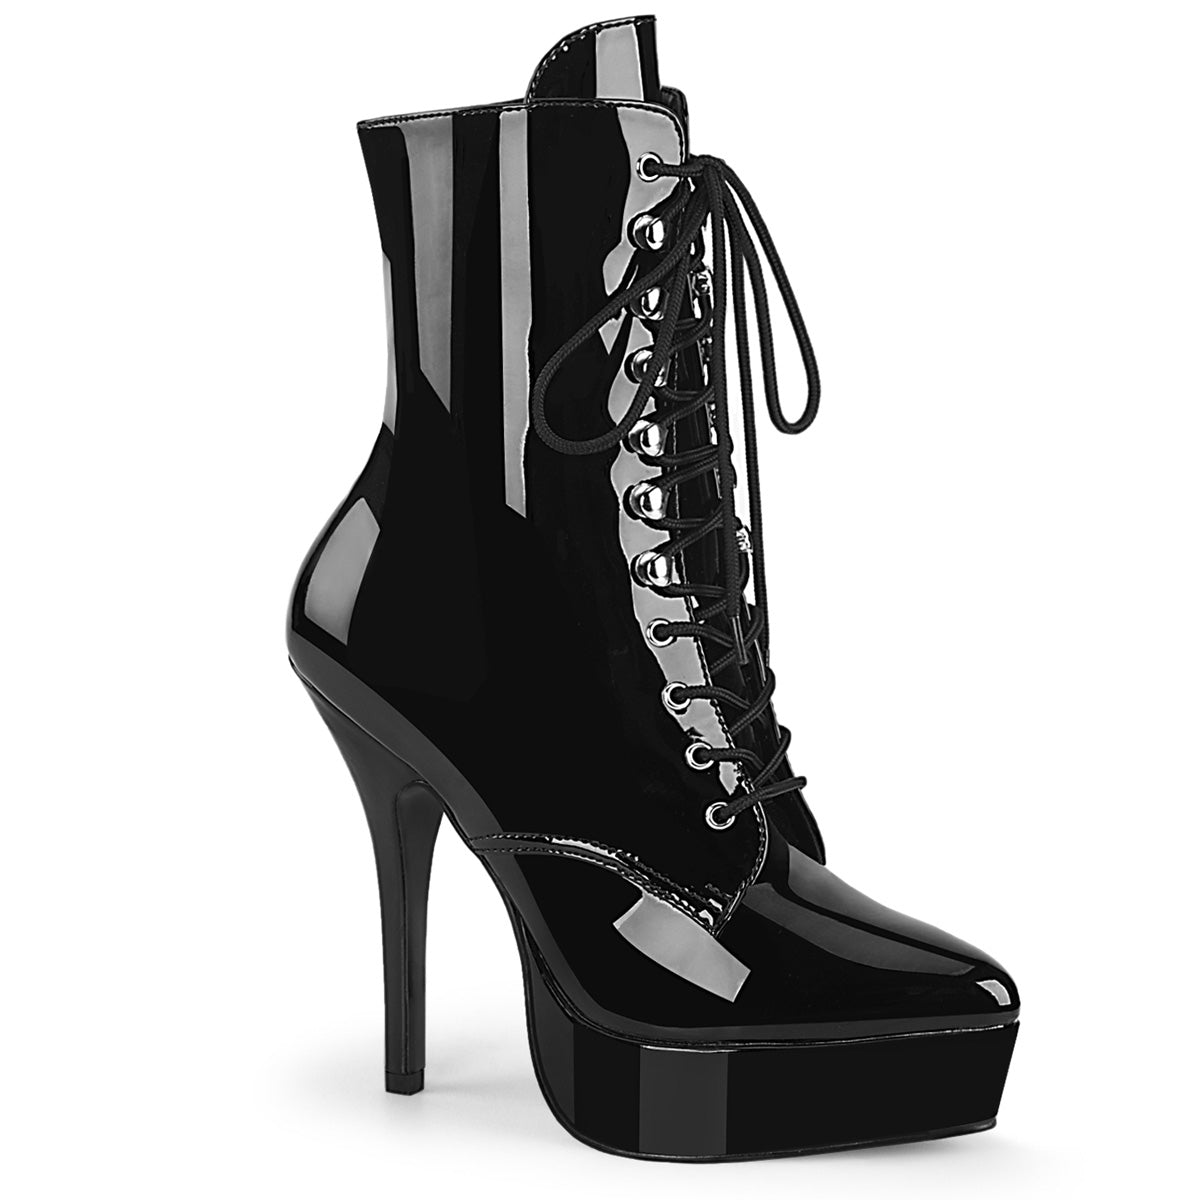 INDULGE-1020 Devious Platforms Indulge Pleasers Patent Ankle Boots